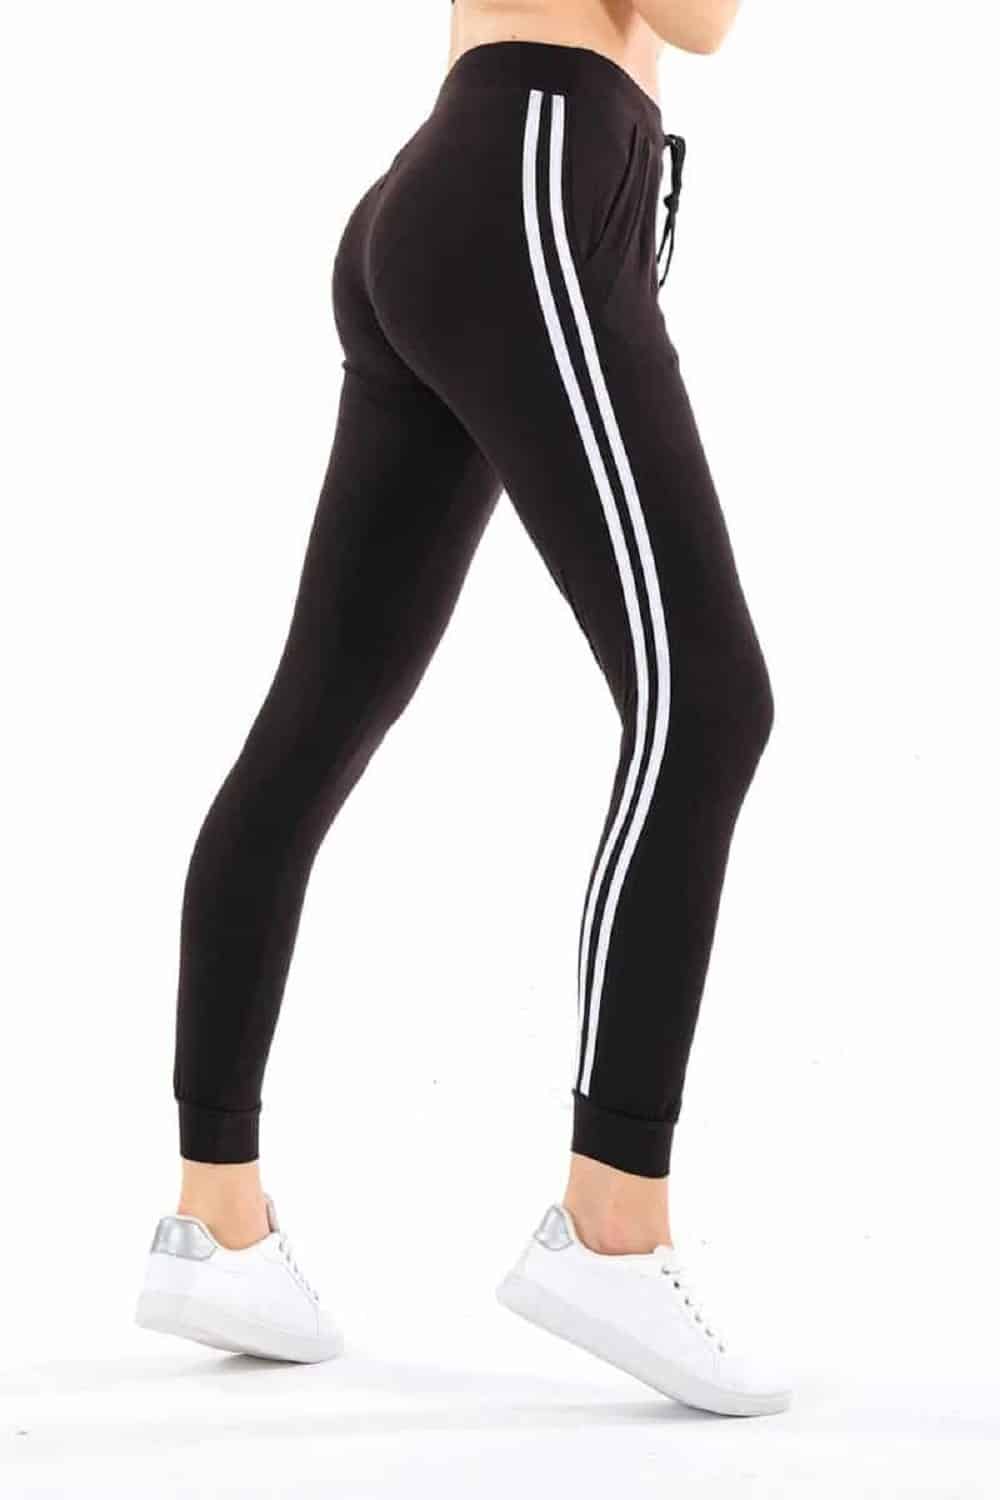 Yummy Material Jogger Pants Black with White Stripes - Its All Leggings